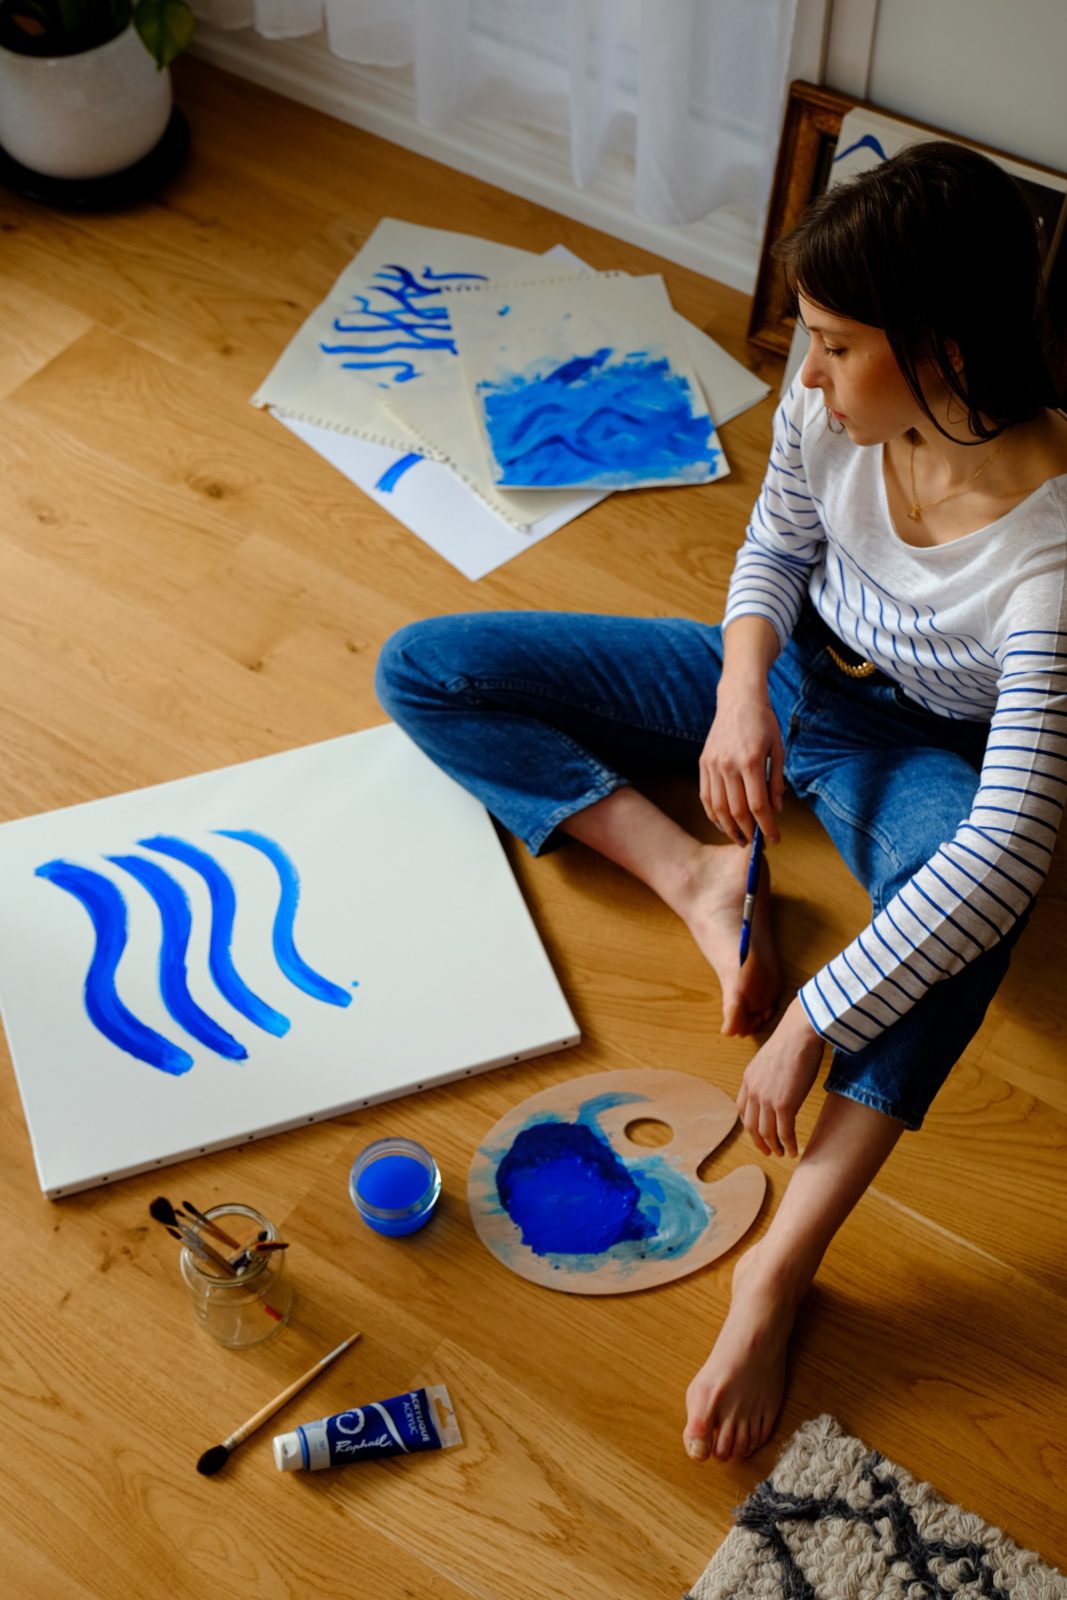 Woman sitting on a wood floor creating artwork with blue paint.